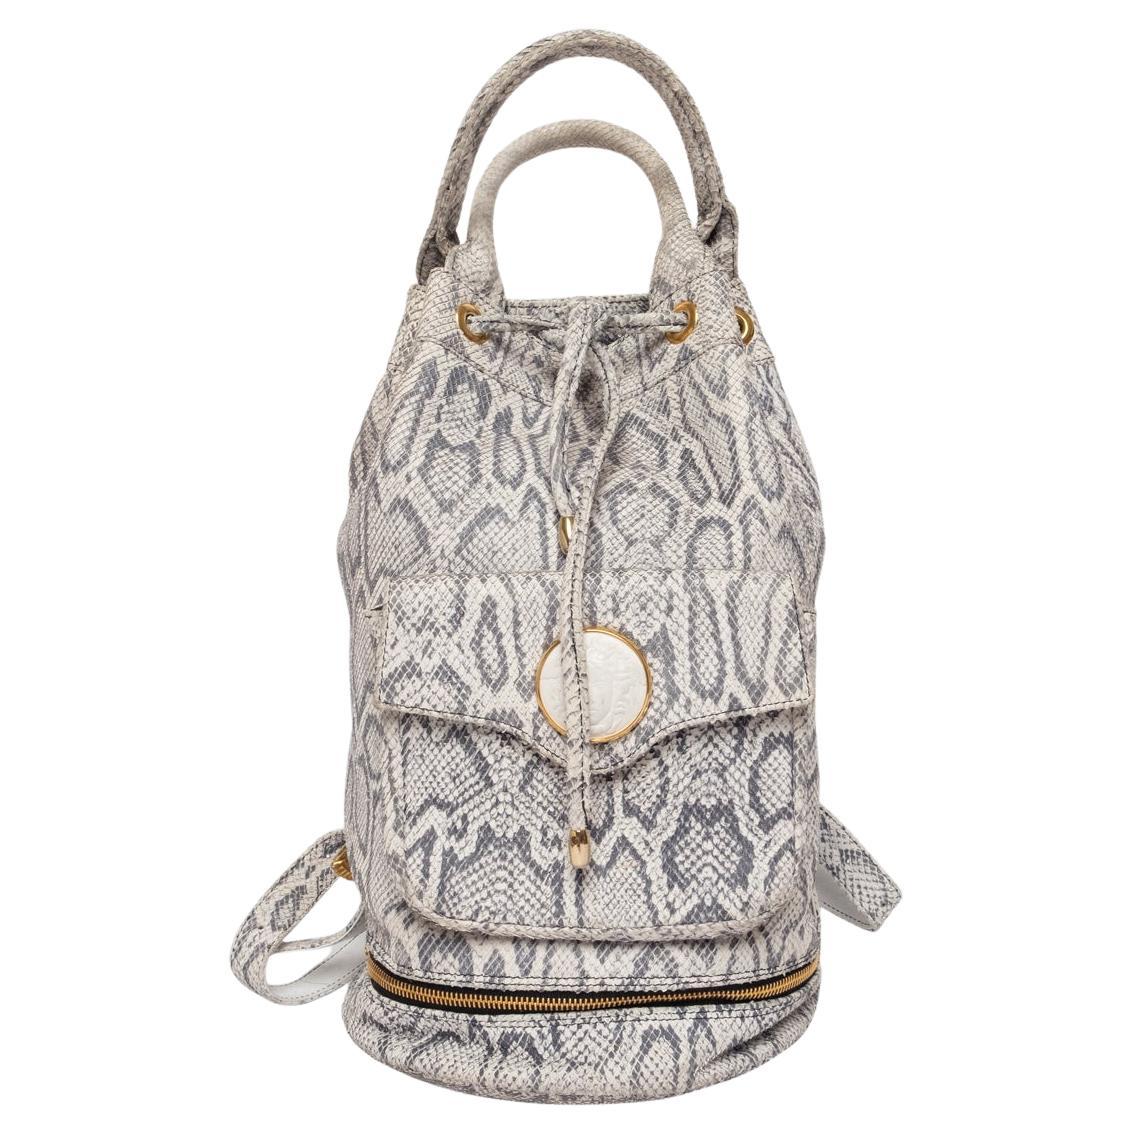 Gianni Versace SS1992 Python Skin Backpack For Sale